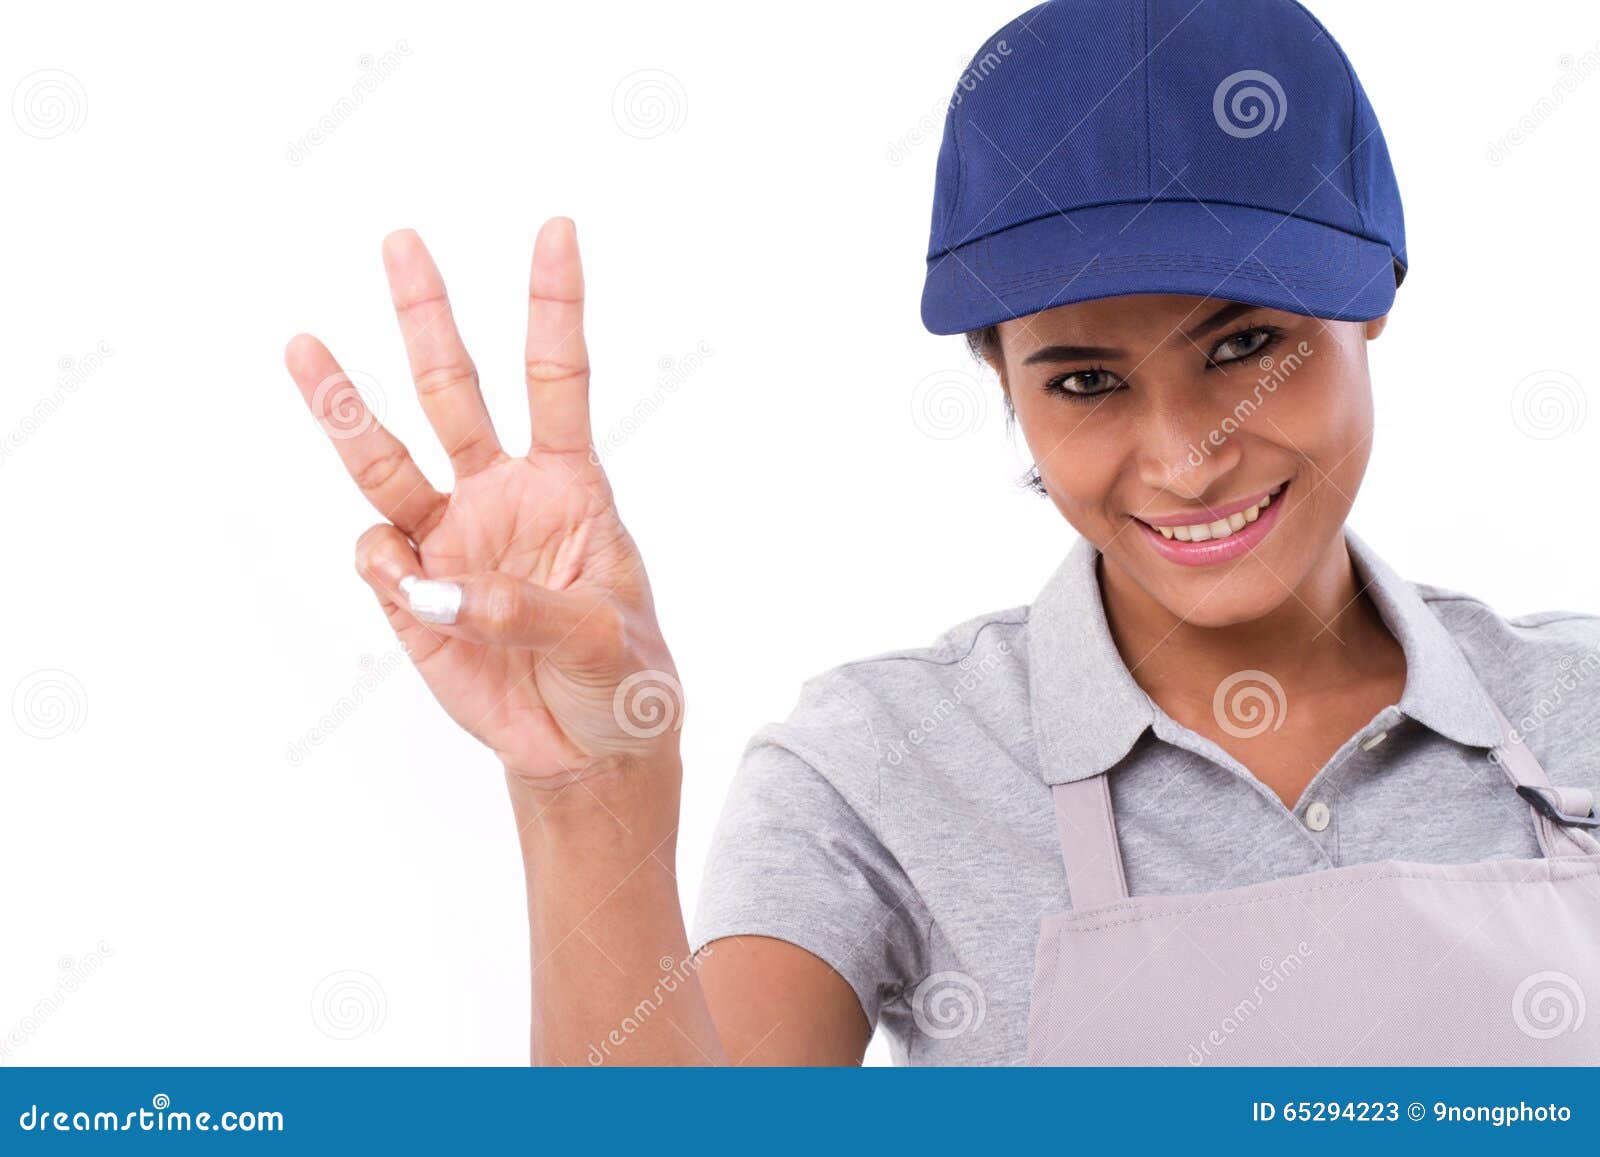 confident female worker raising, pointing up 3 fingers gesture